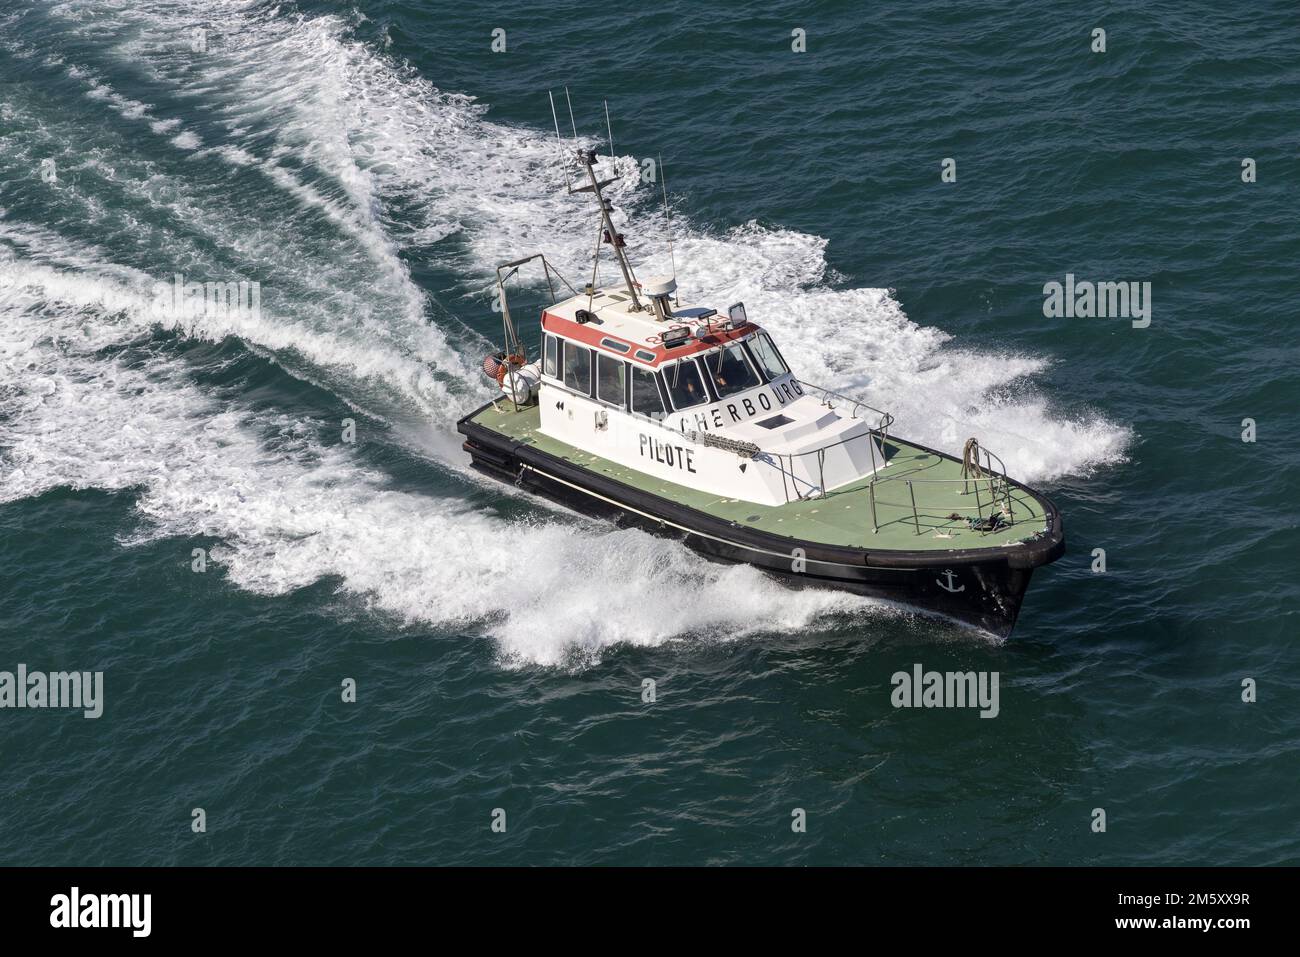 Pilot boat in harbour, Cherbourg, France Stock Photo